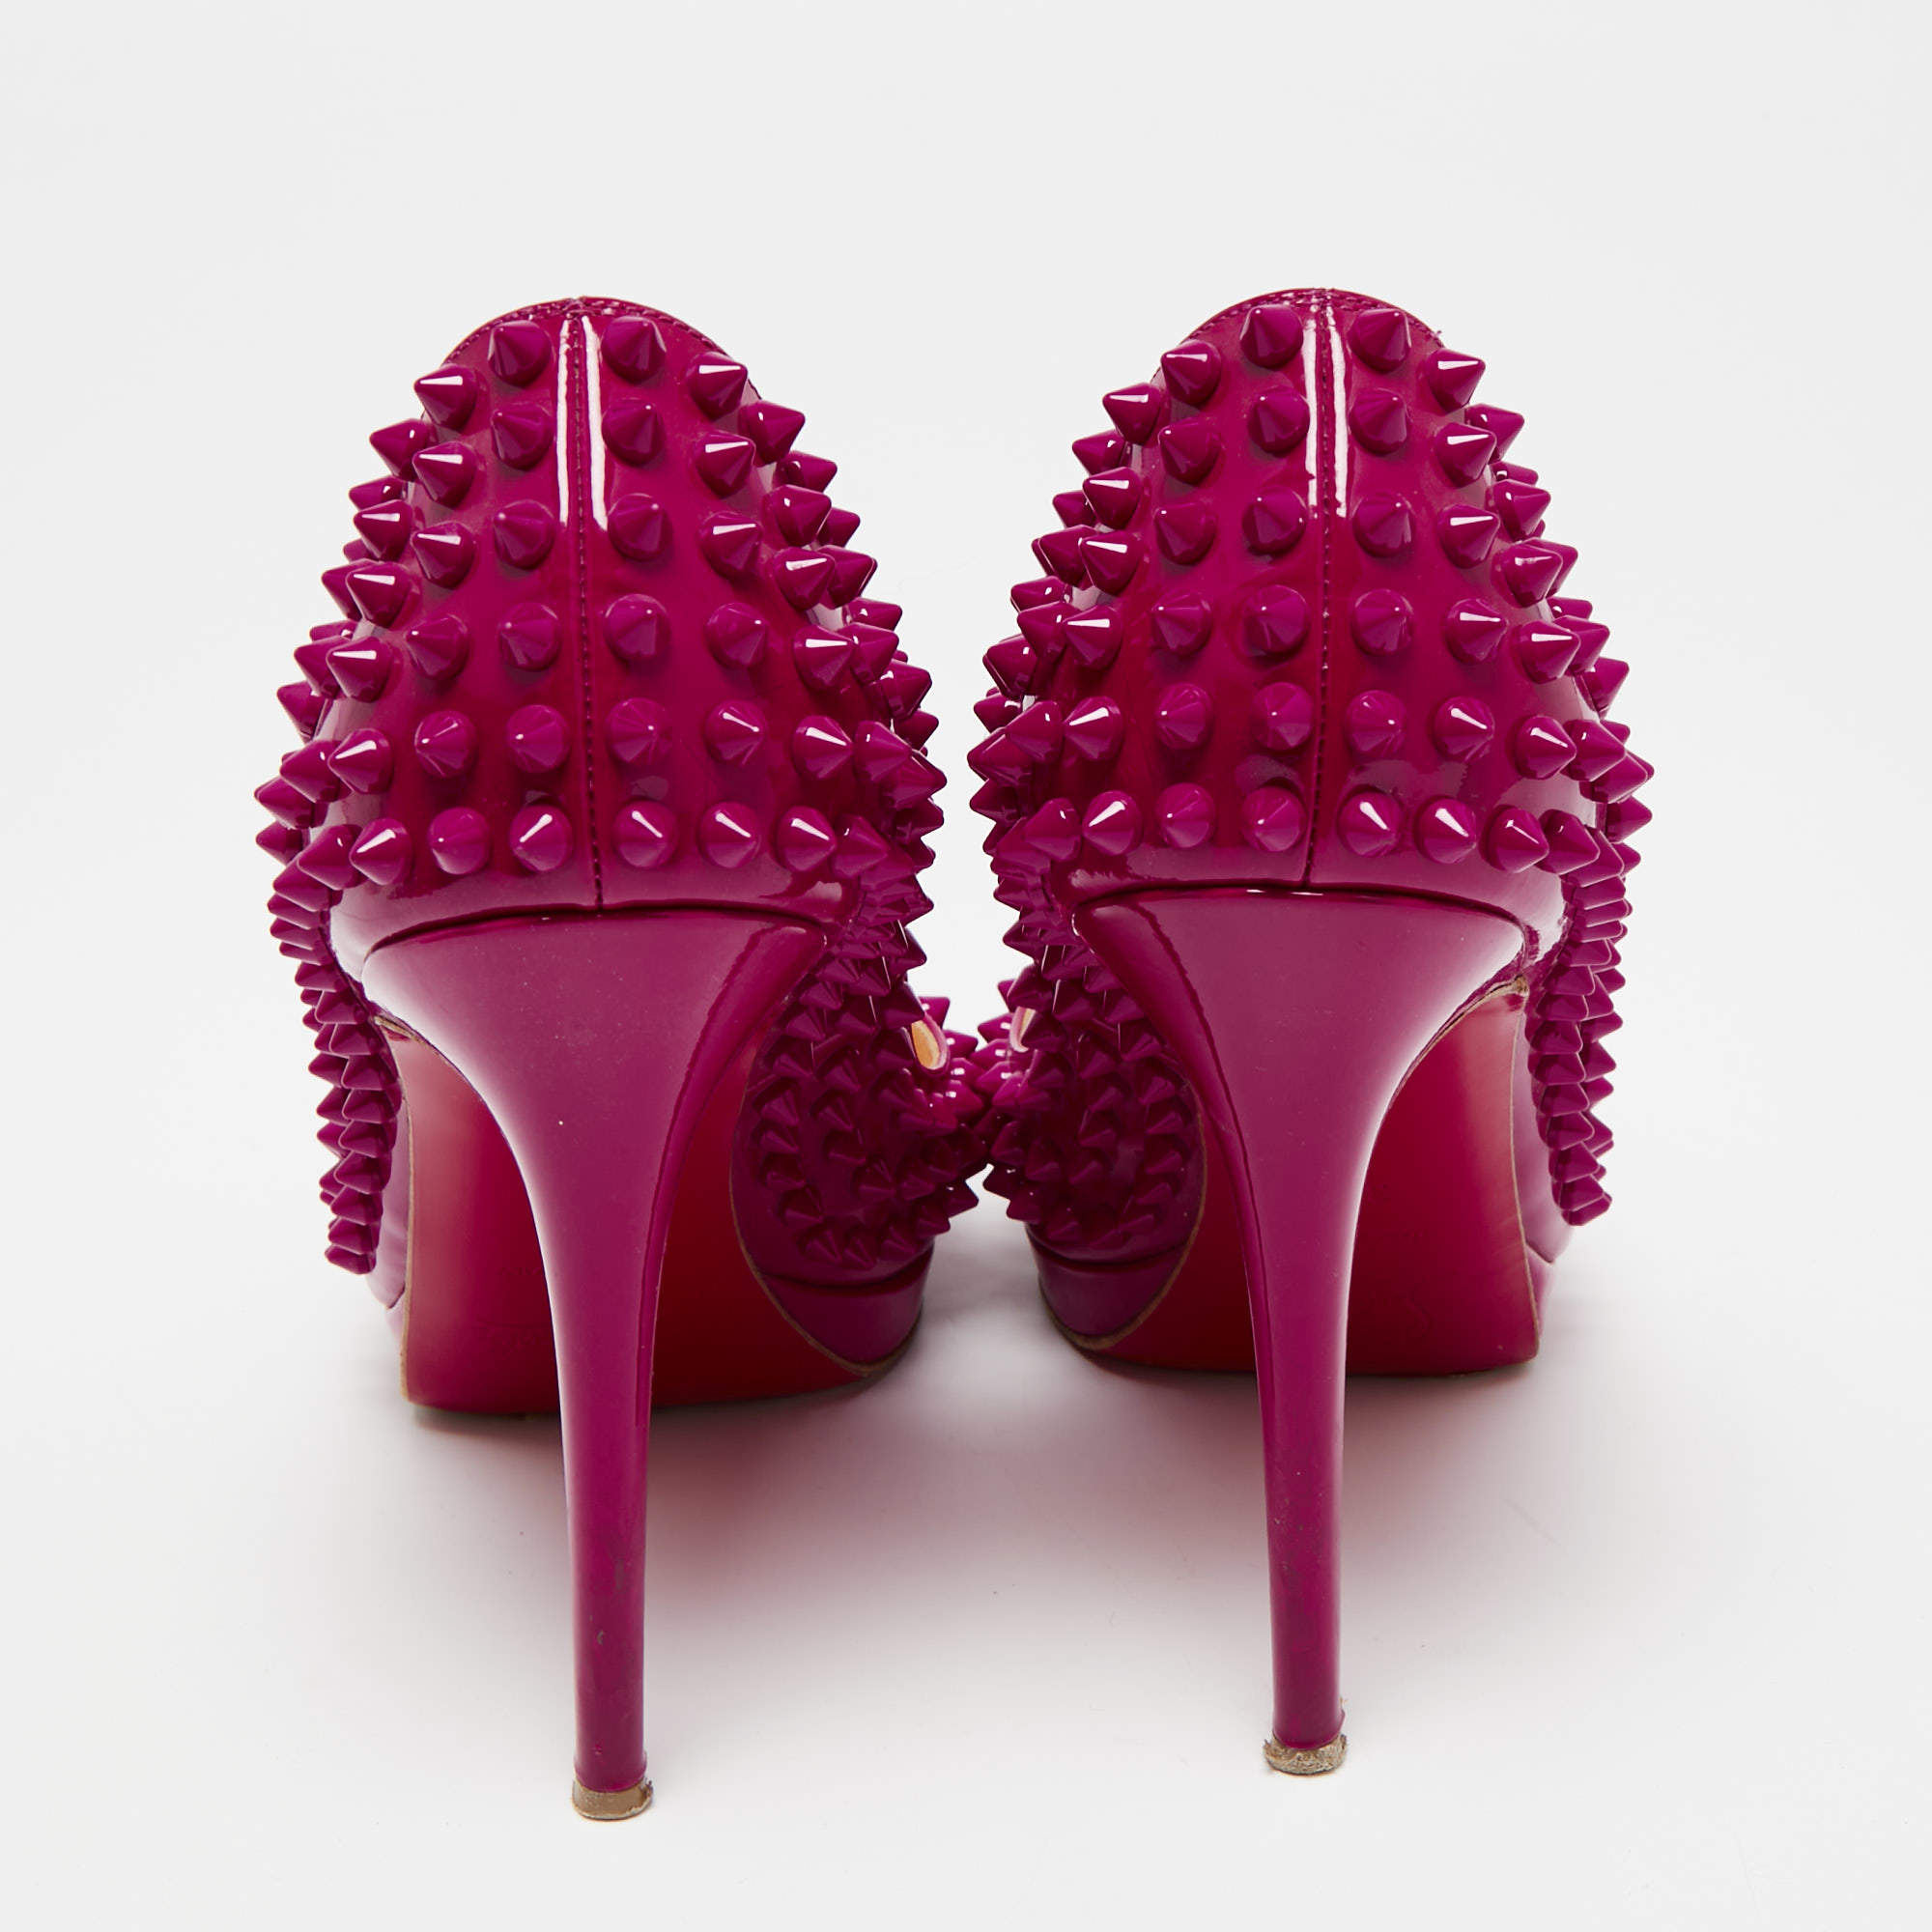 Christian Louboutin Studded Heels? HOT or NOT?